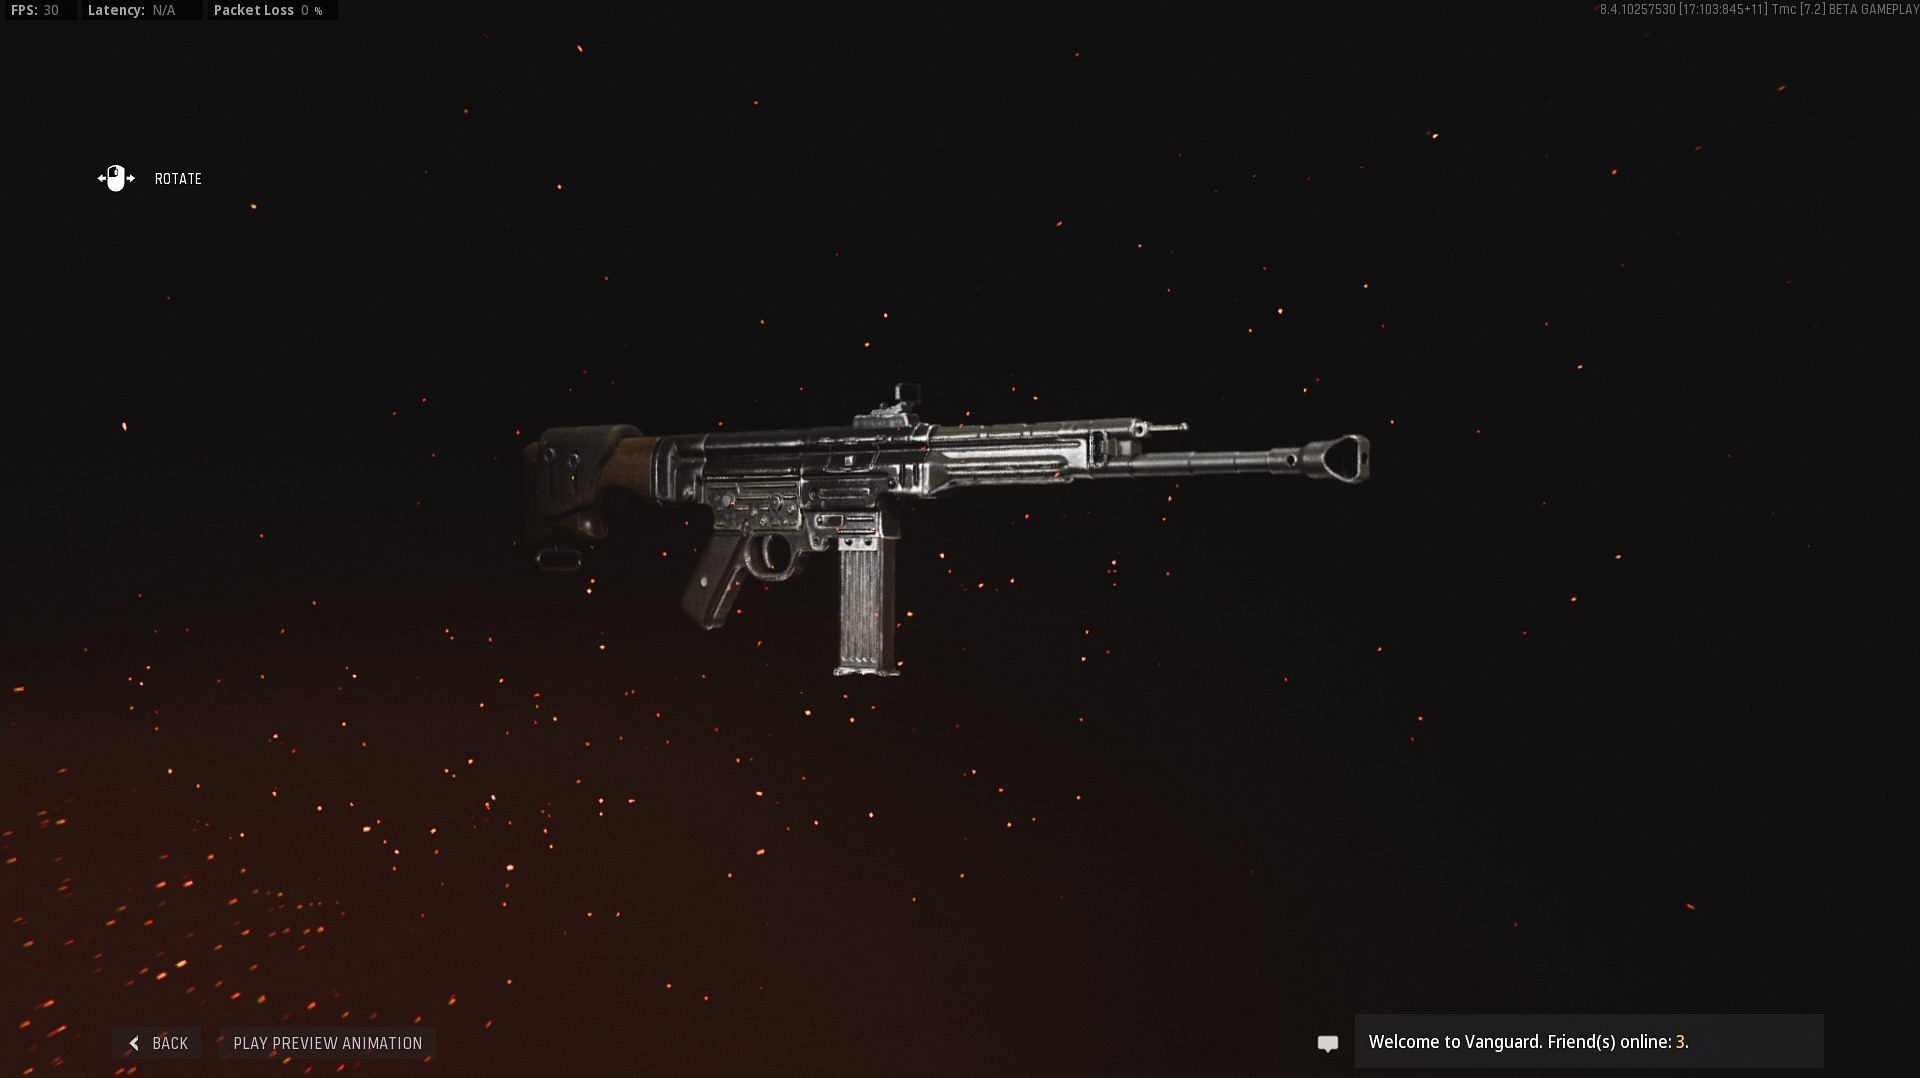 The STG44 is already well-balanced in Call of Duty: Vanguard (Image via Activision)